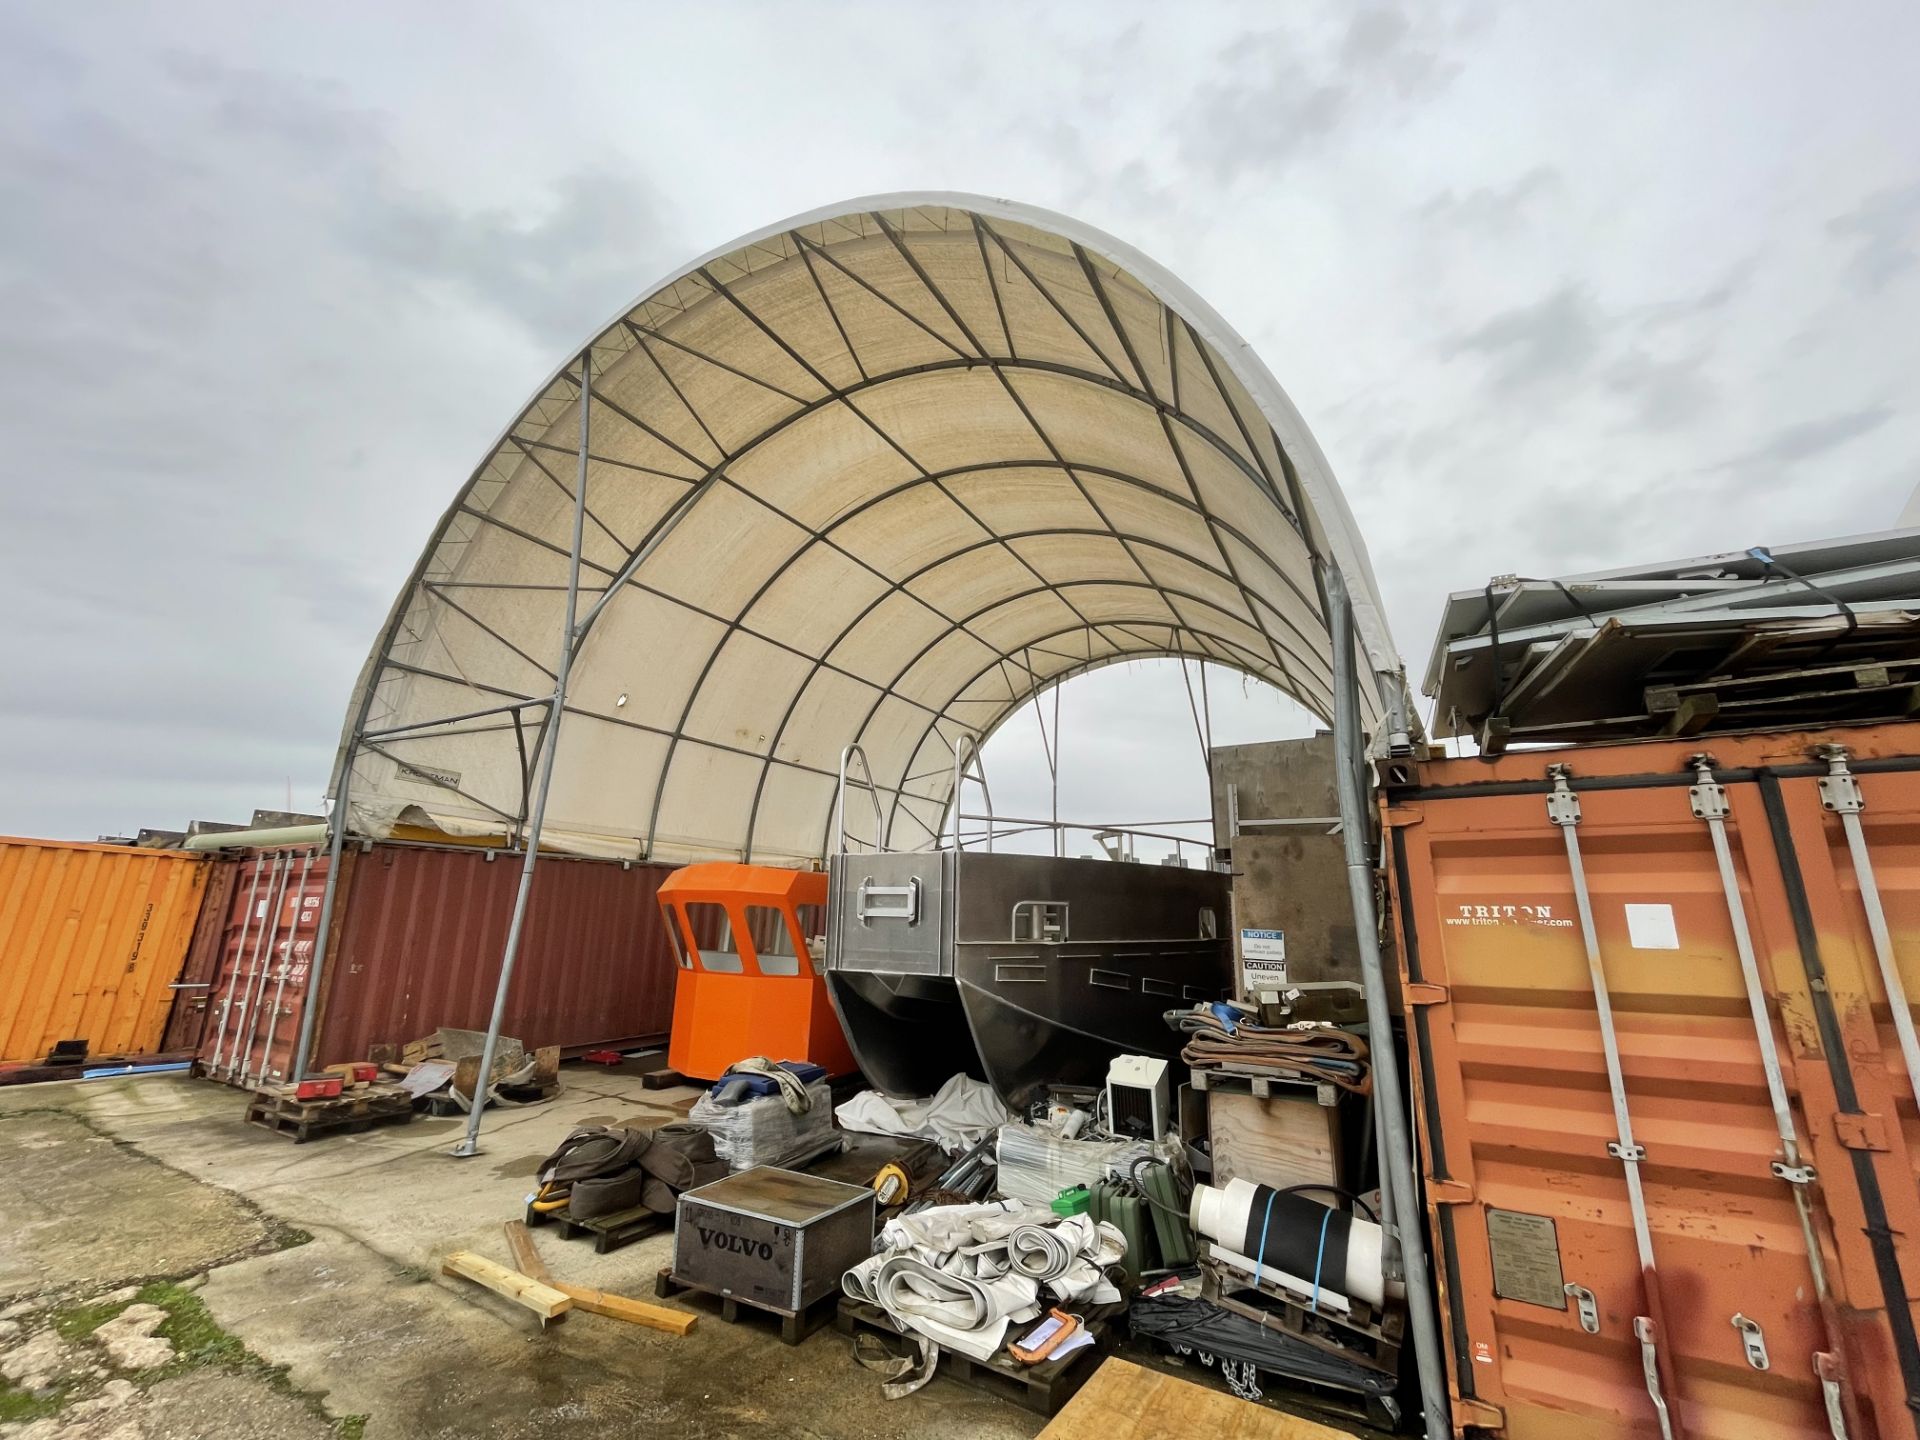 Kroftman Arch Shelter Canopy between two Containers, Measures c 9.5m Across x 12m Depth with an Apex - Image 2 of 5